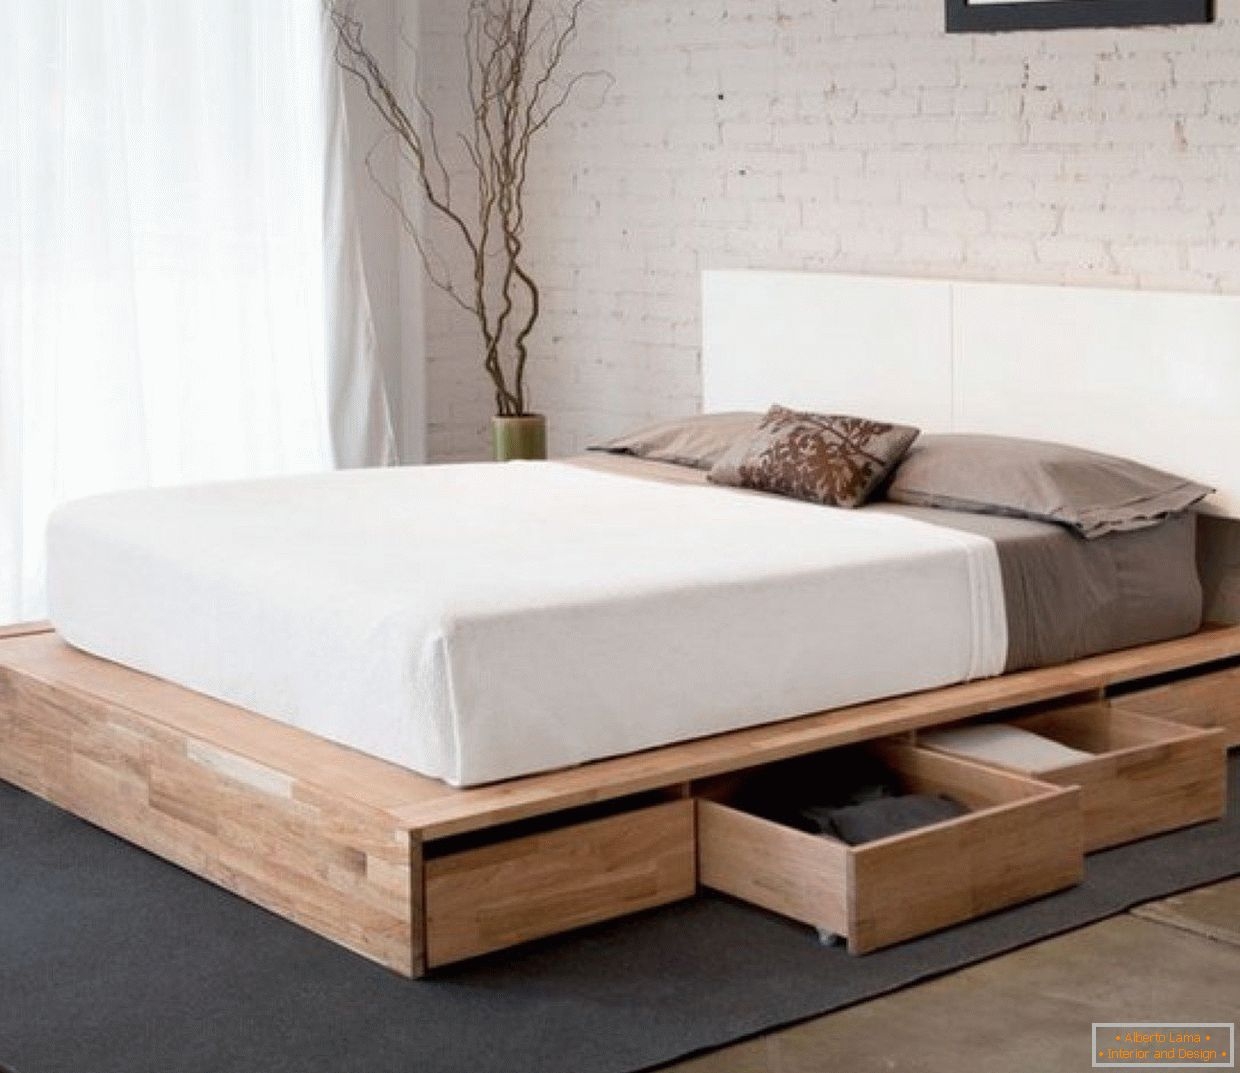 Bed With Drawers Underneath Visualhunt, King Bed Frame With Under Storage